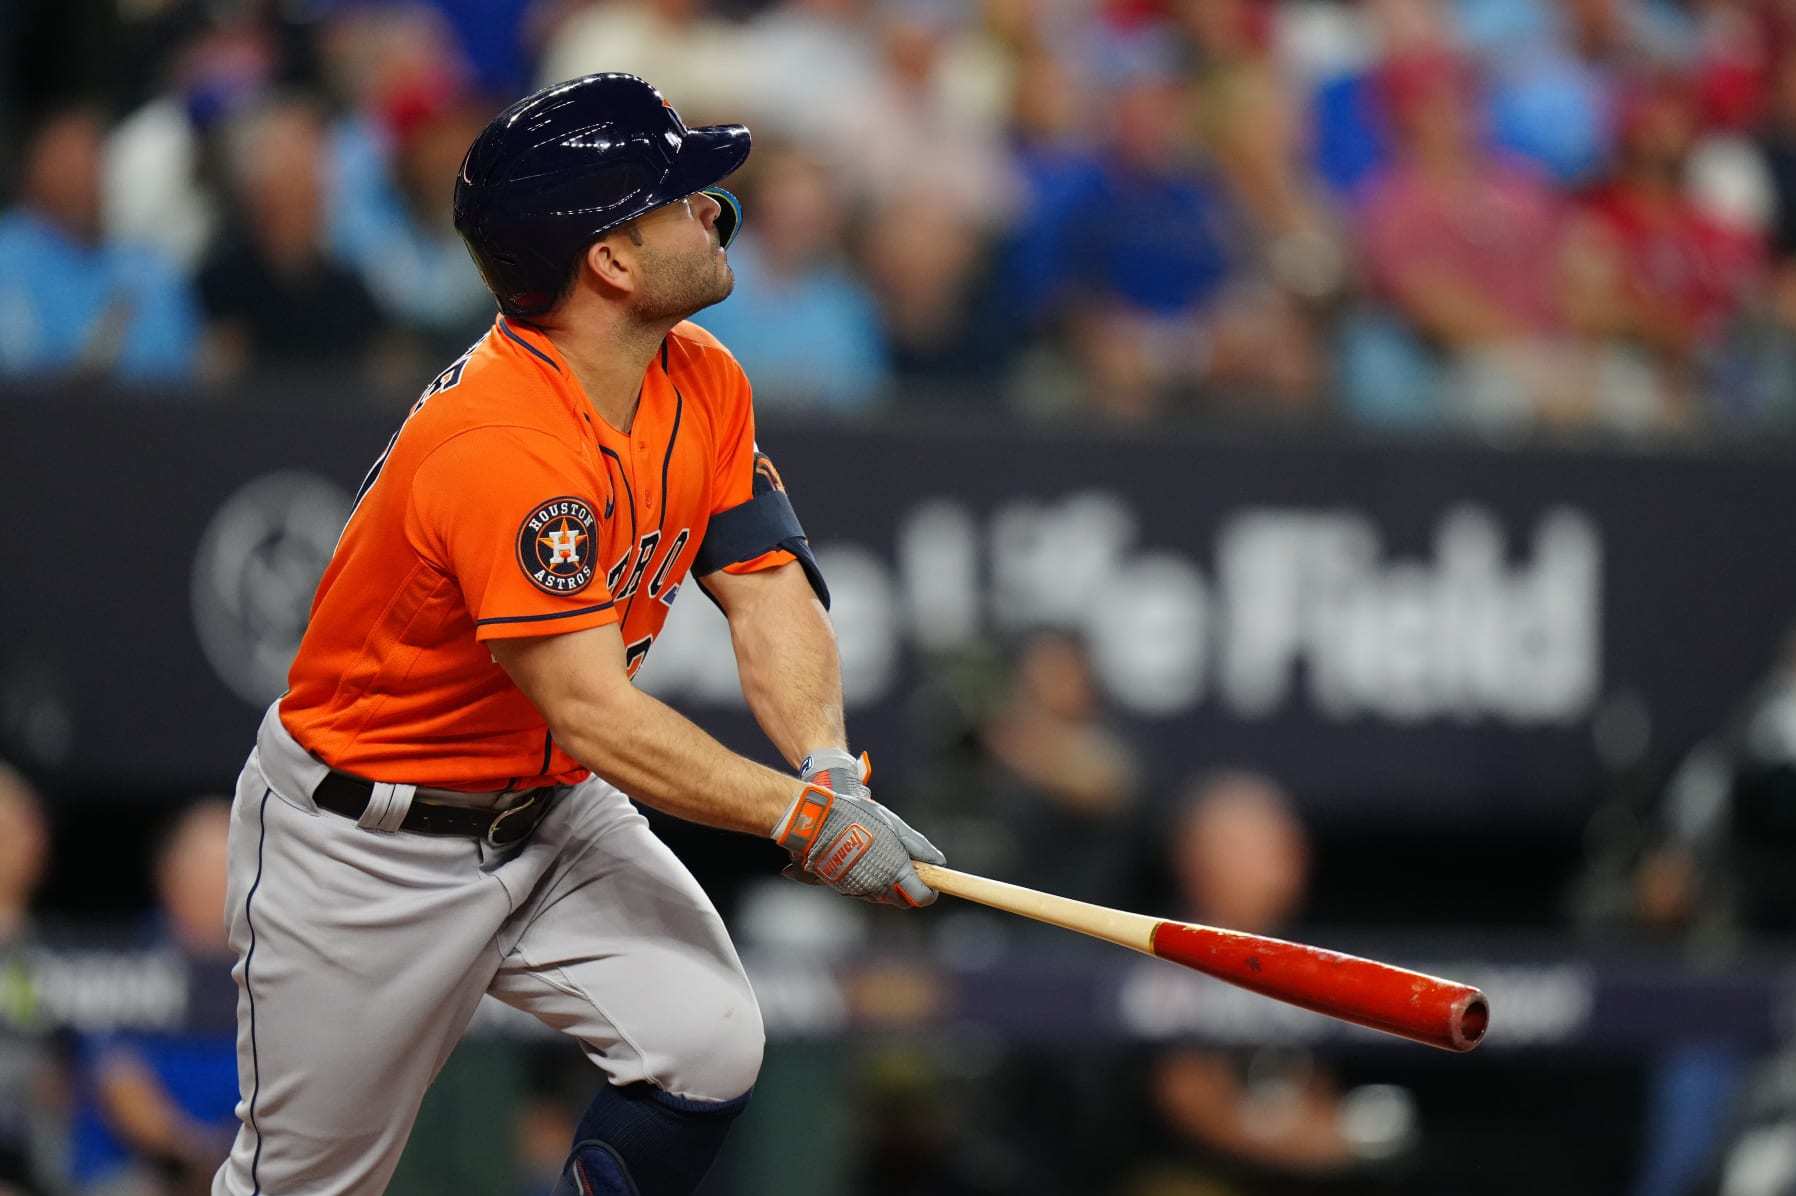 Astros 2, Red Sox 0: Lackey's solid start wasted as Boston bats fall silent